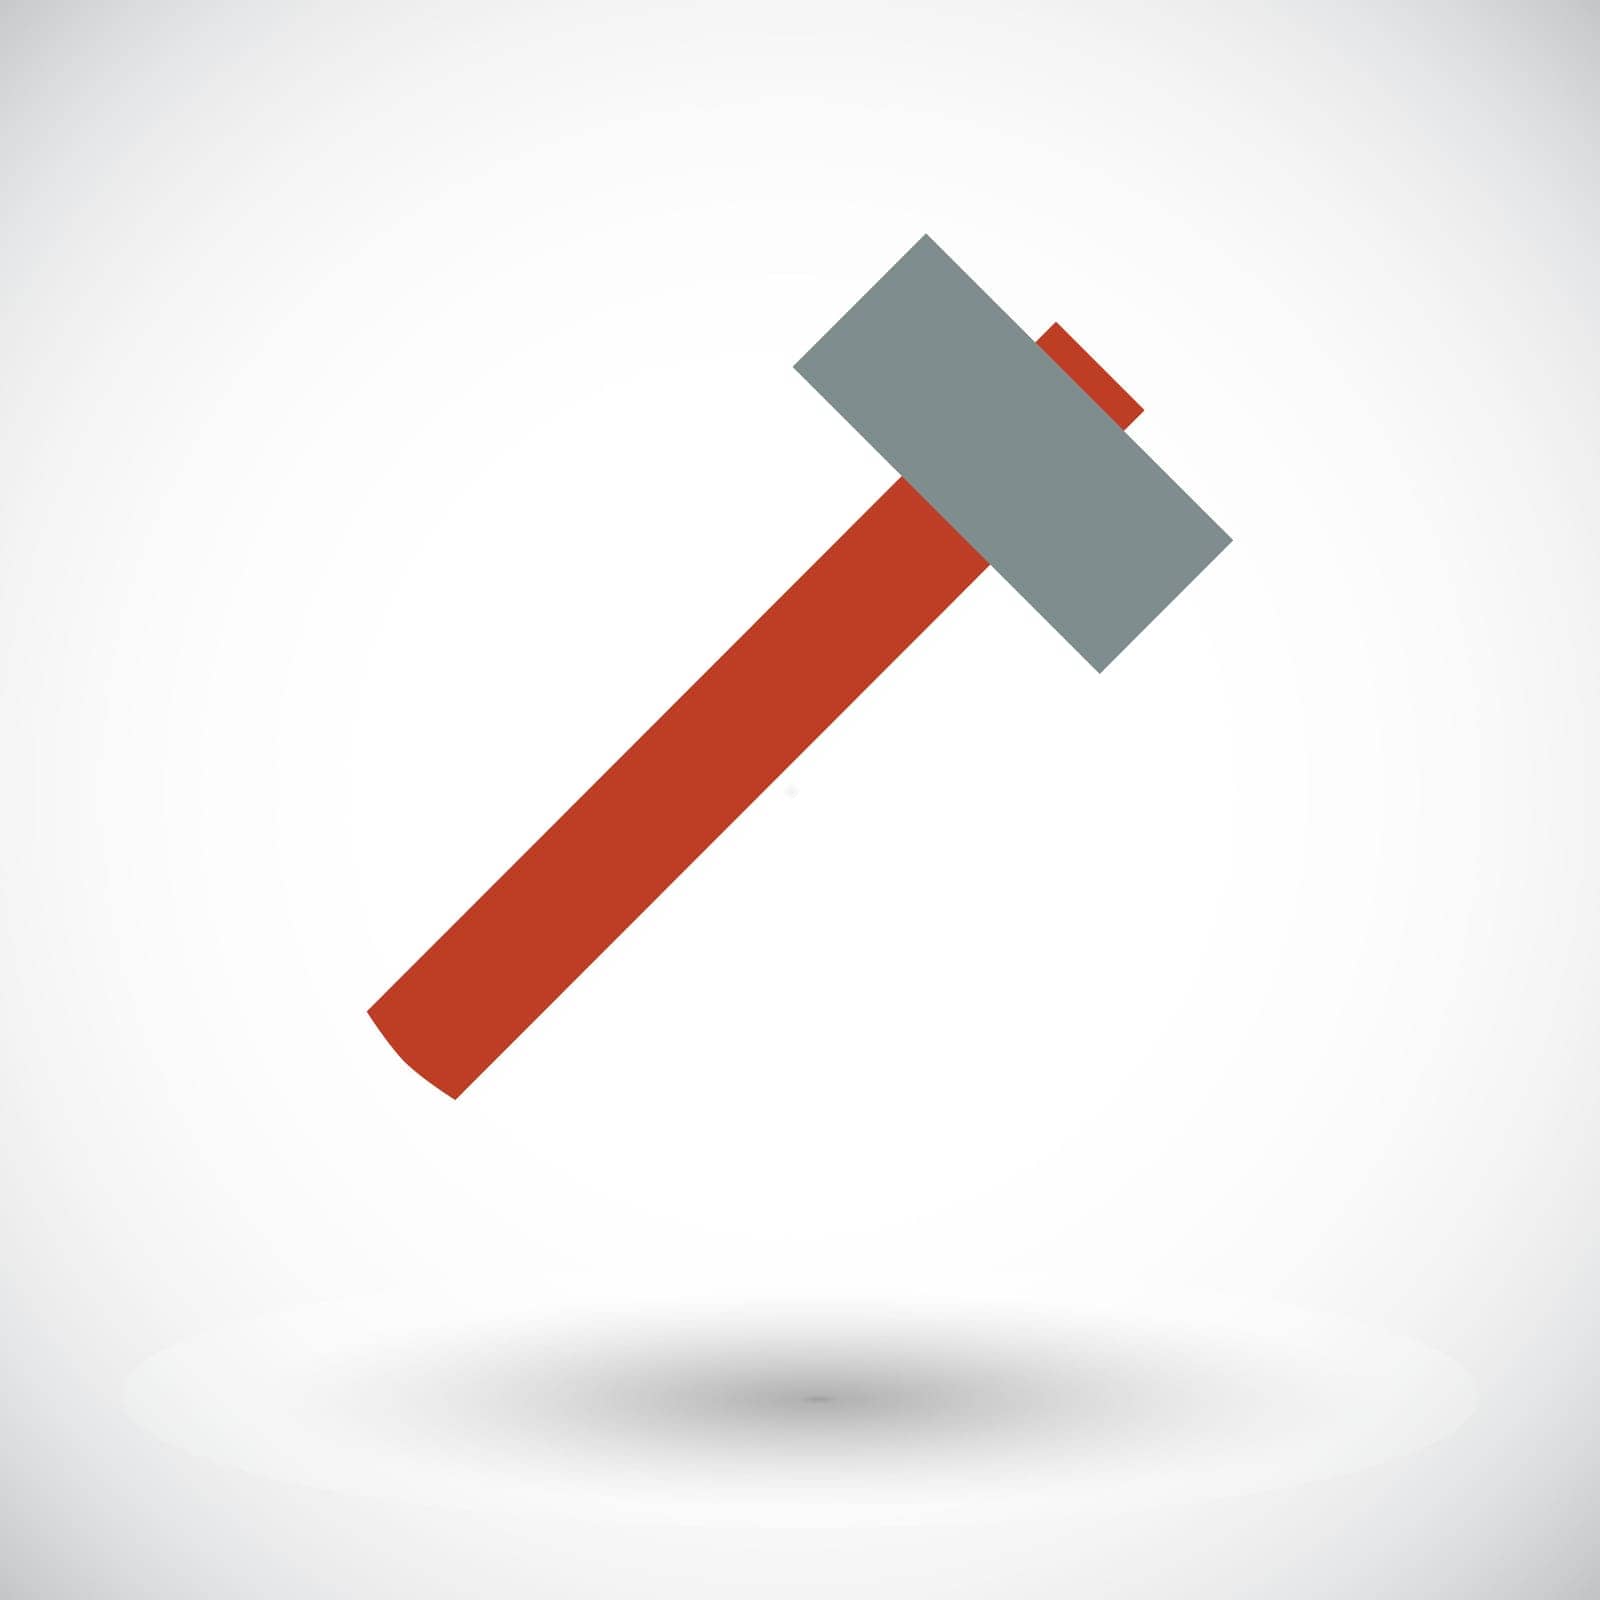 Hammer. Flat vector icon for mobile and web applications. Vector illustration.